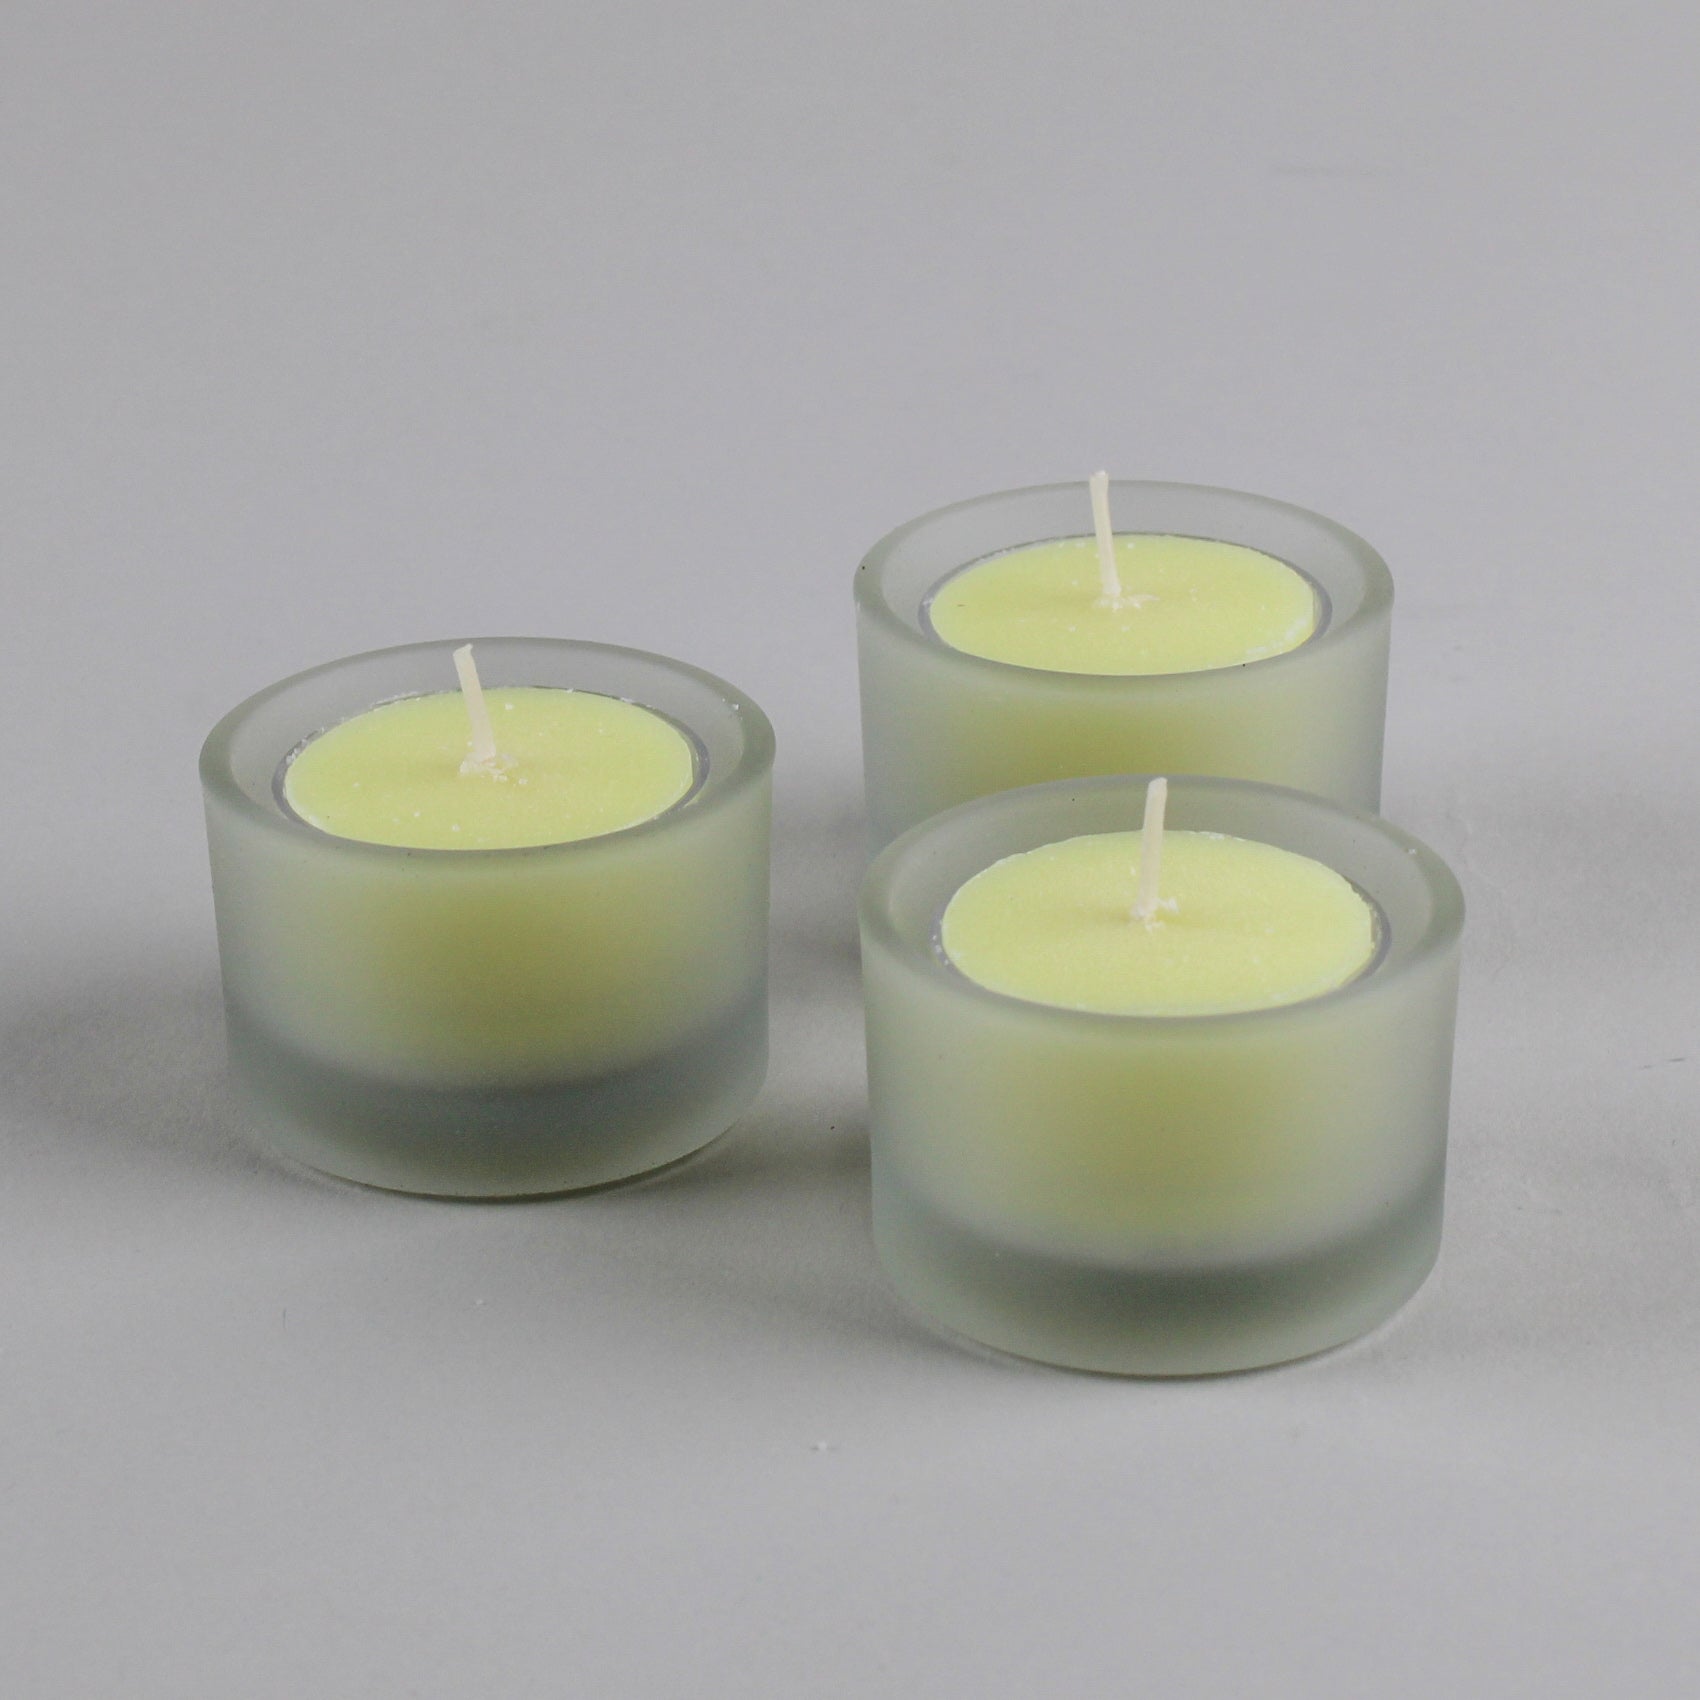 Richland Clear Cup Extended Burn Tealight Candles Light Yellow Unscented Set of 100